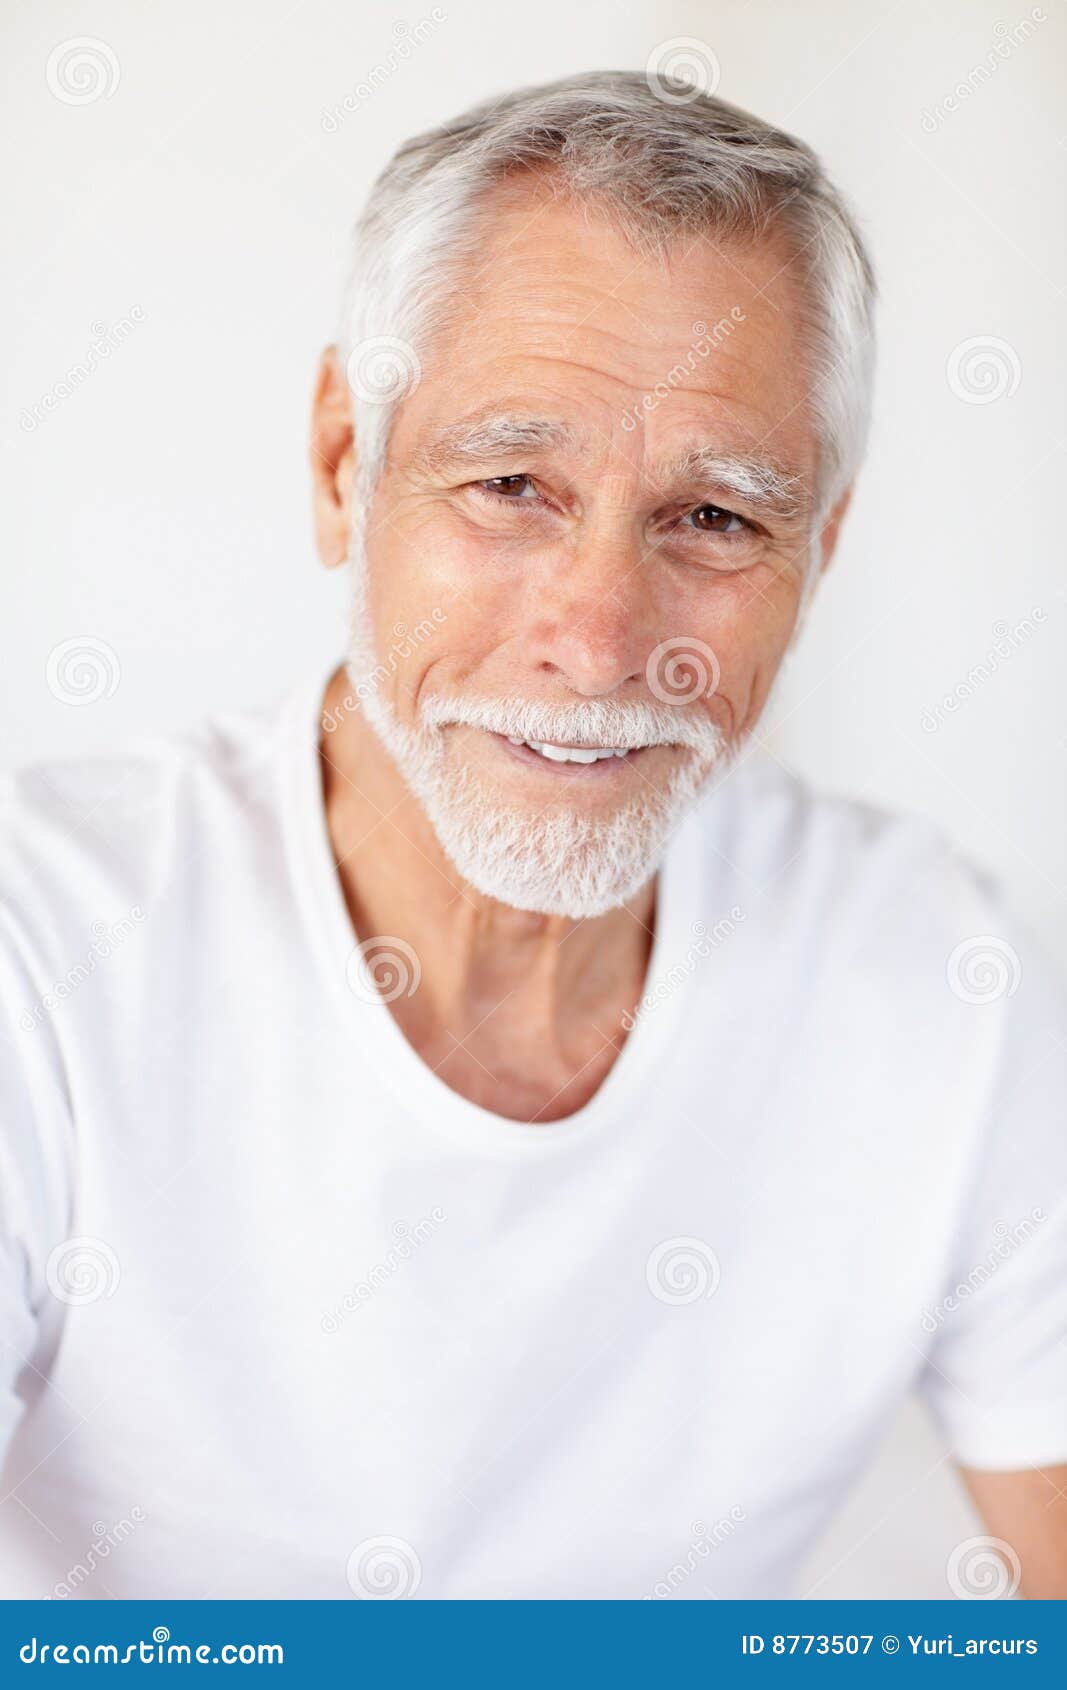 Stock Photo: A handsome old man smiling confidently. Image: